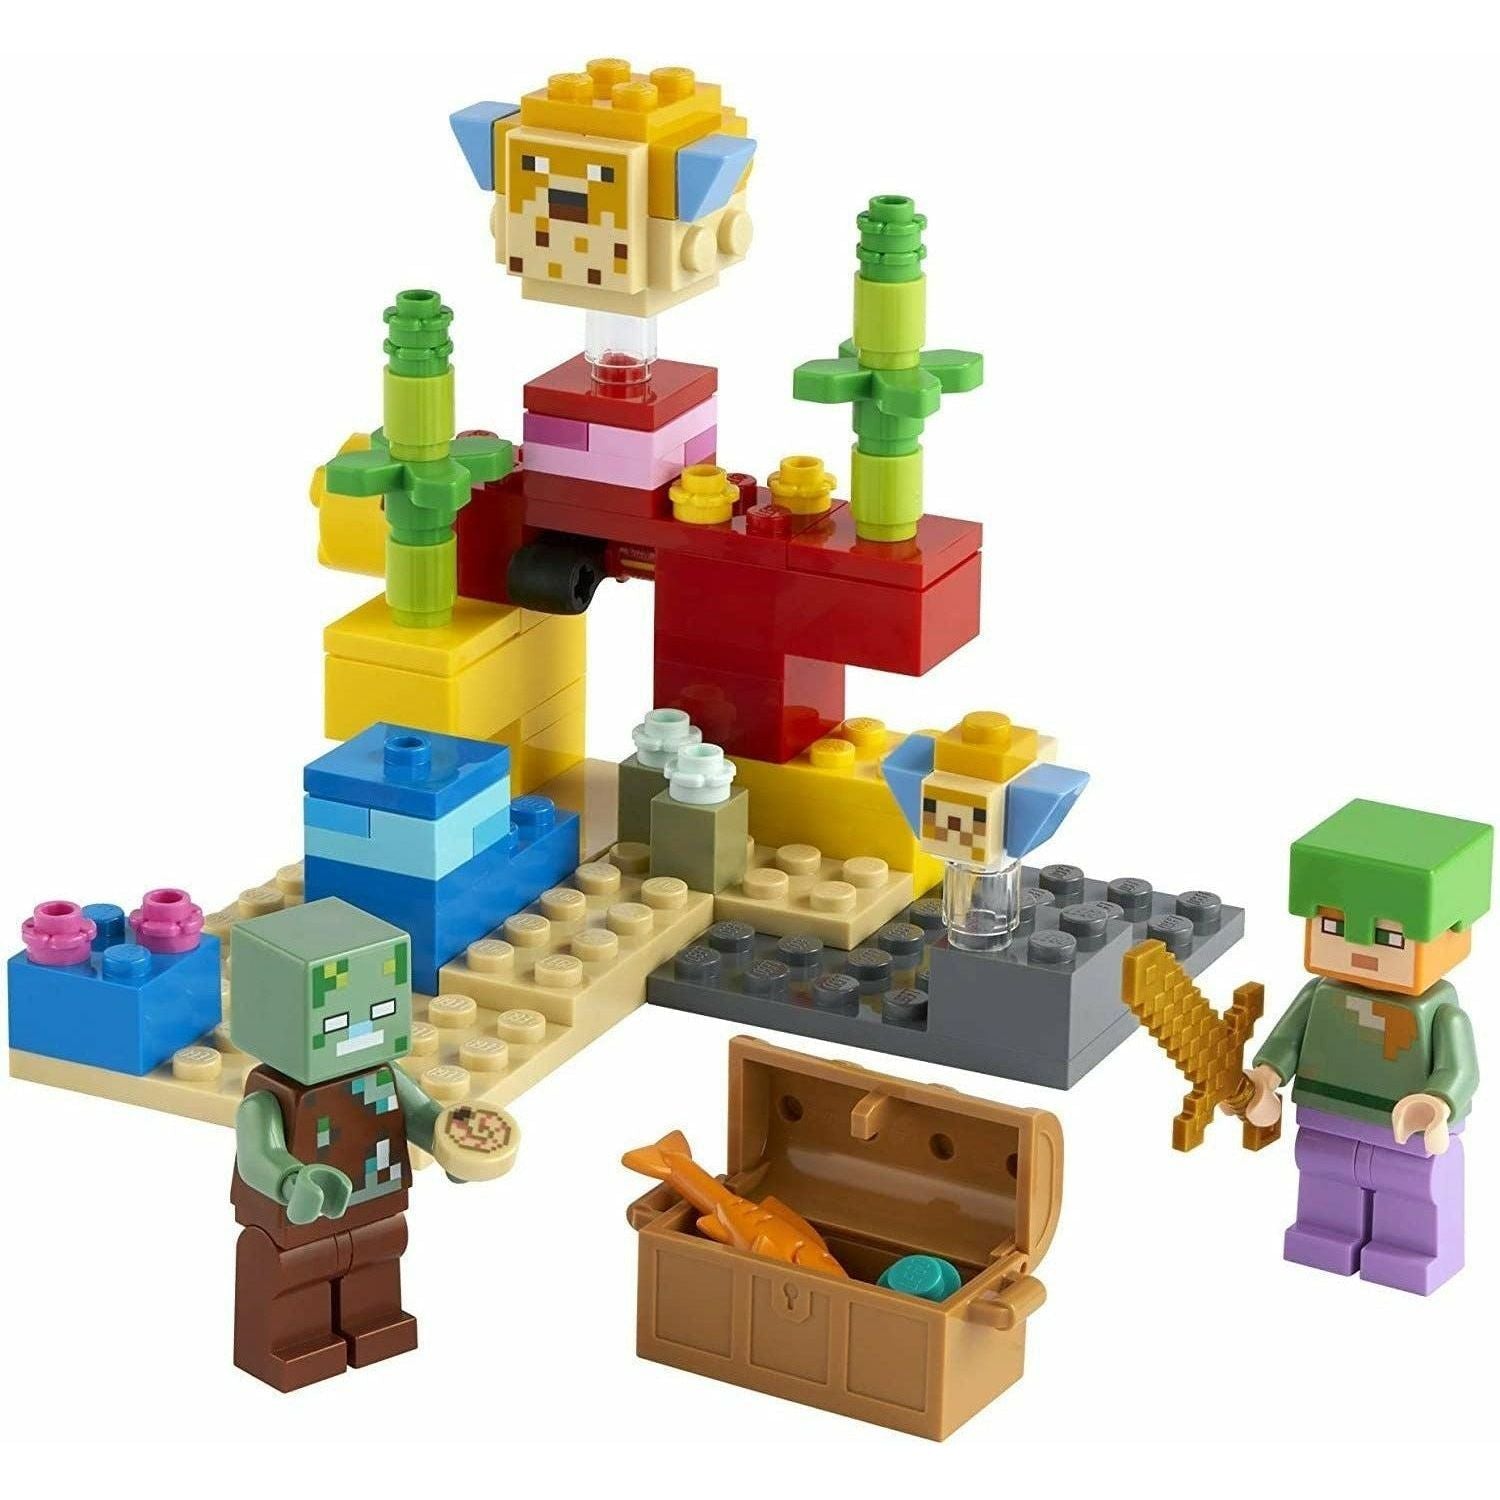 LEGO Minecraft The Coral Reef 21164 Hands-on Minecraft Marine Toy (92 Pieces) - BumbleToys - 6+ Years, 8+ Years, 8-13 Years, Boys, LEGO, Minecraft, OXE, Pre-Order